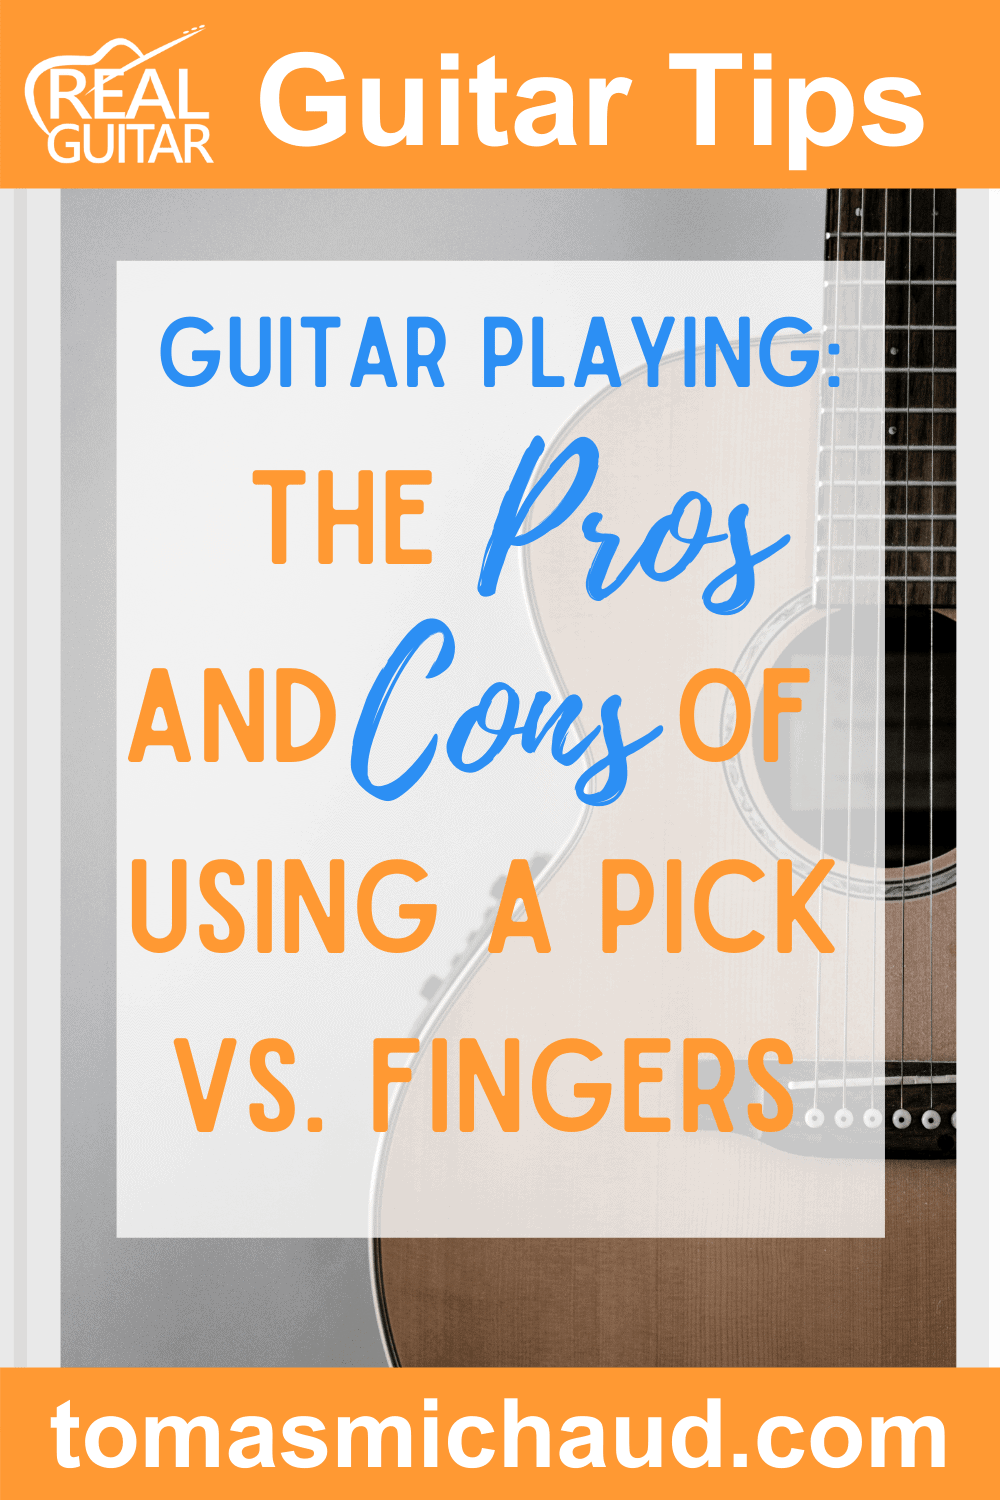 Guitar Playing: The Pros and Cons of Using a Pick vs. Fingers